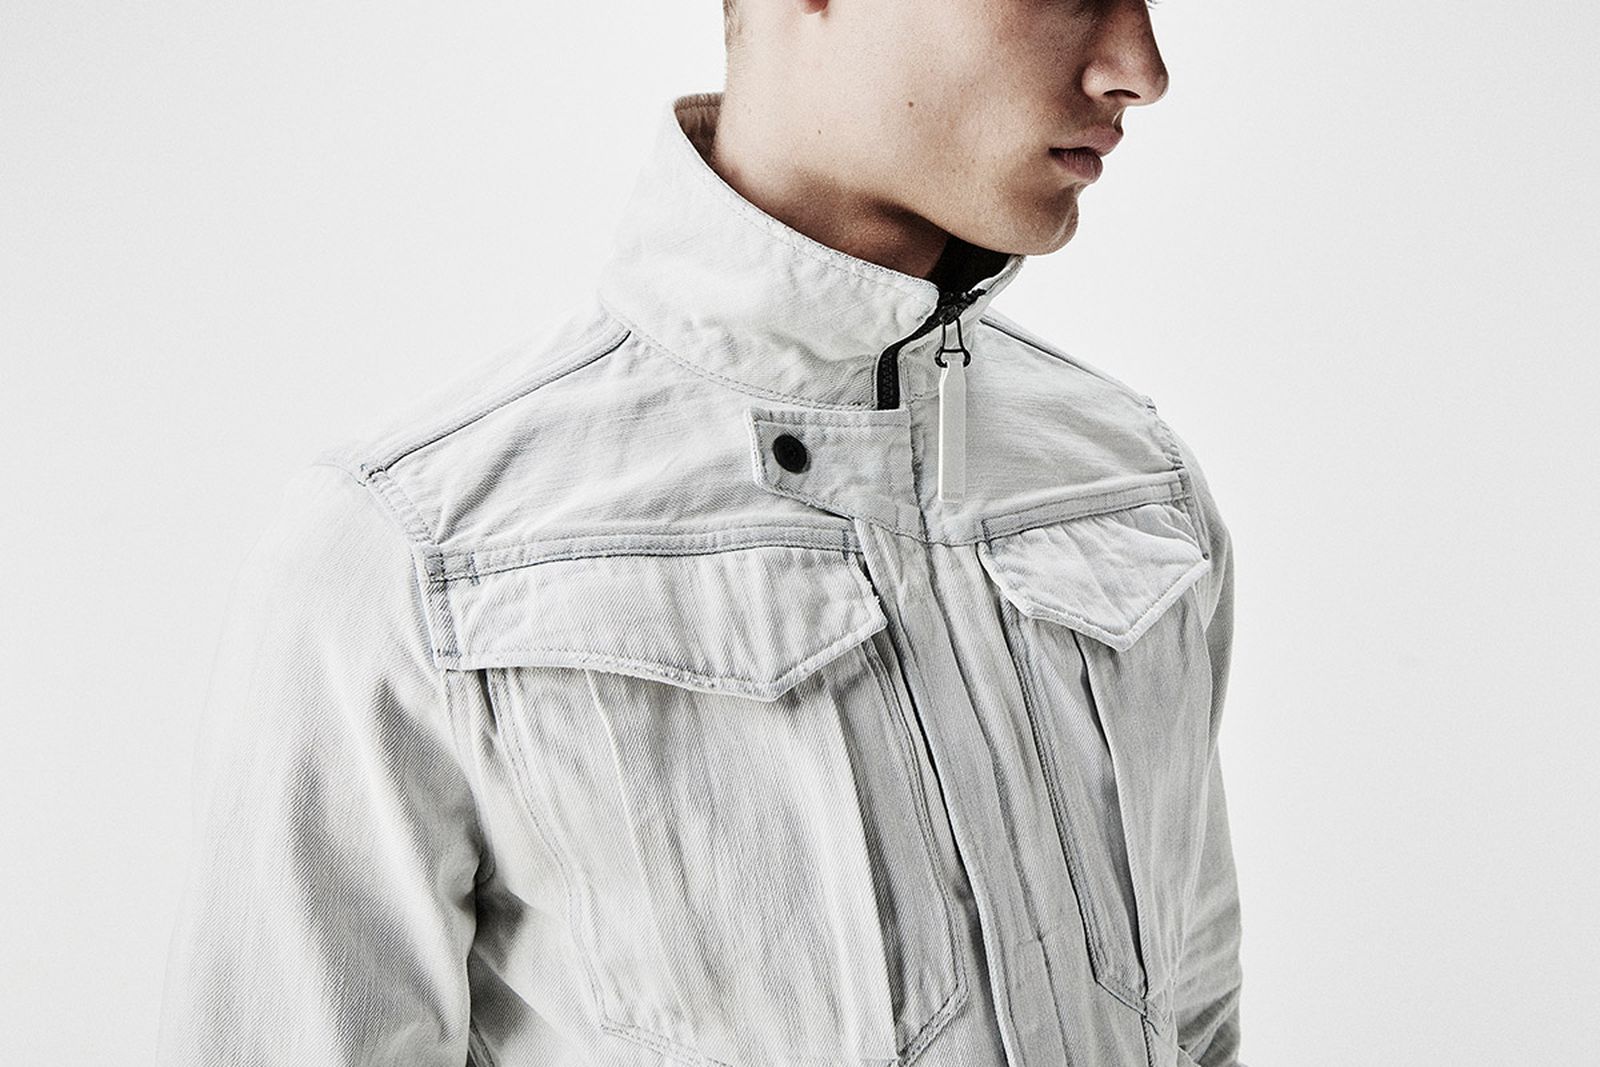 gstar-raw-research-aitor-throup-05